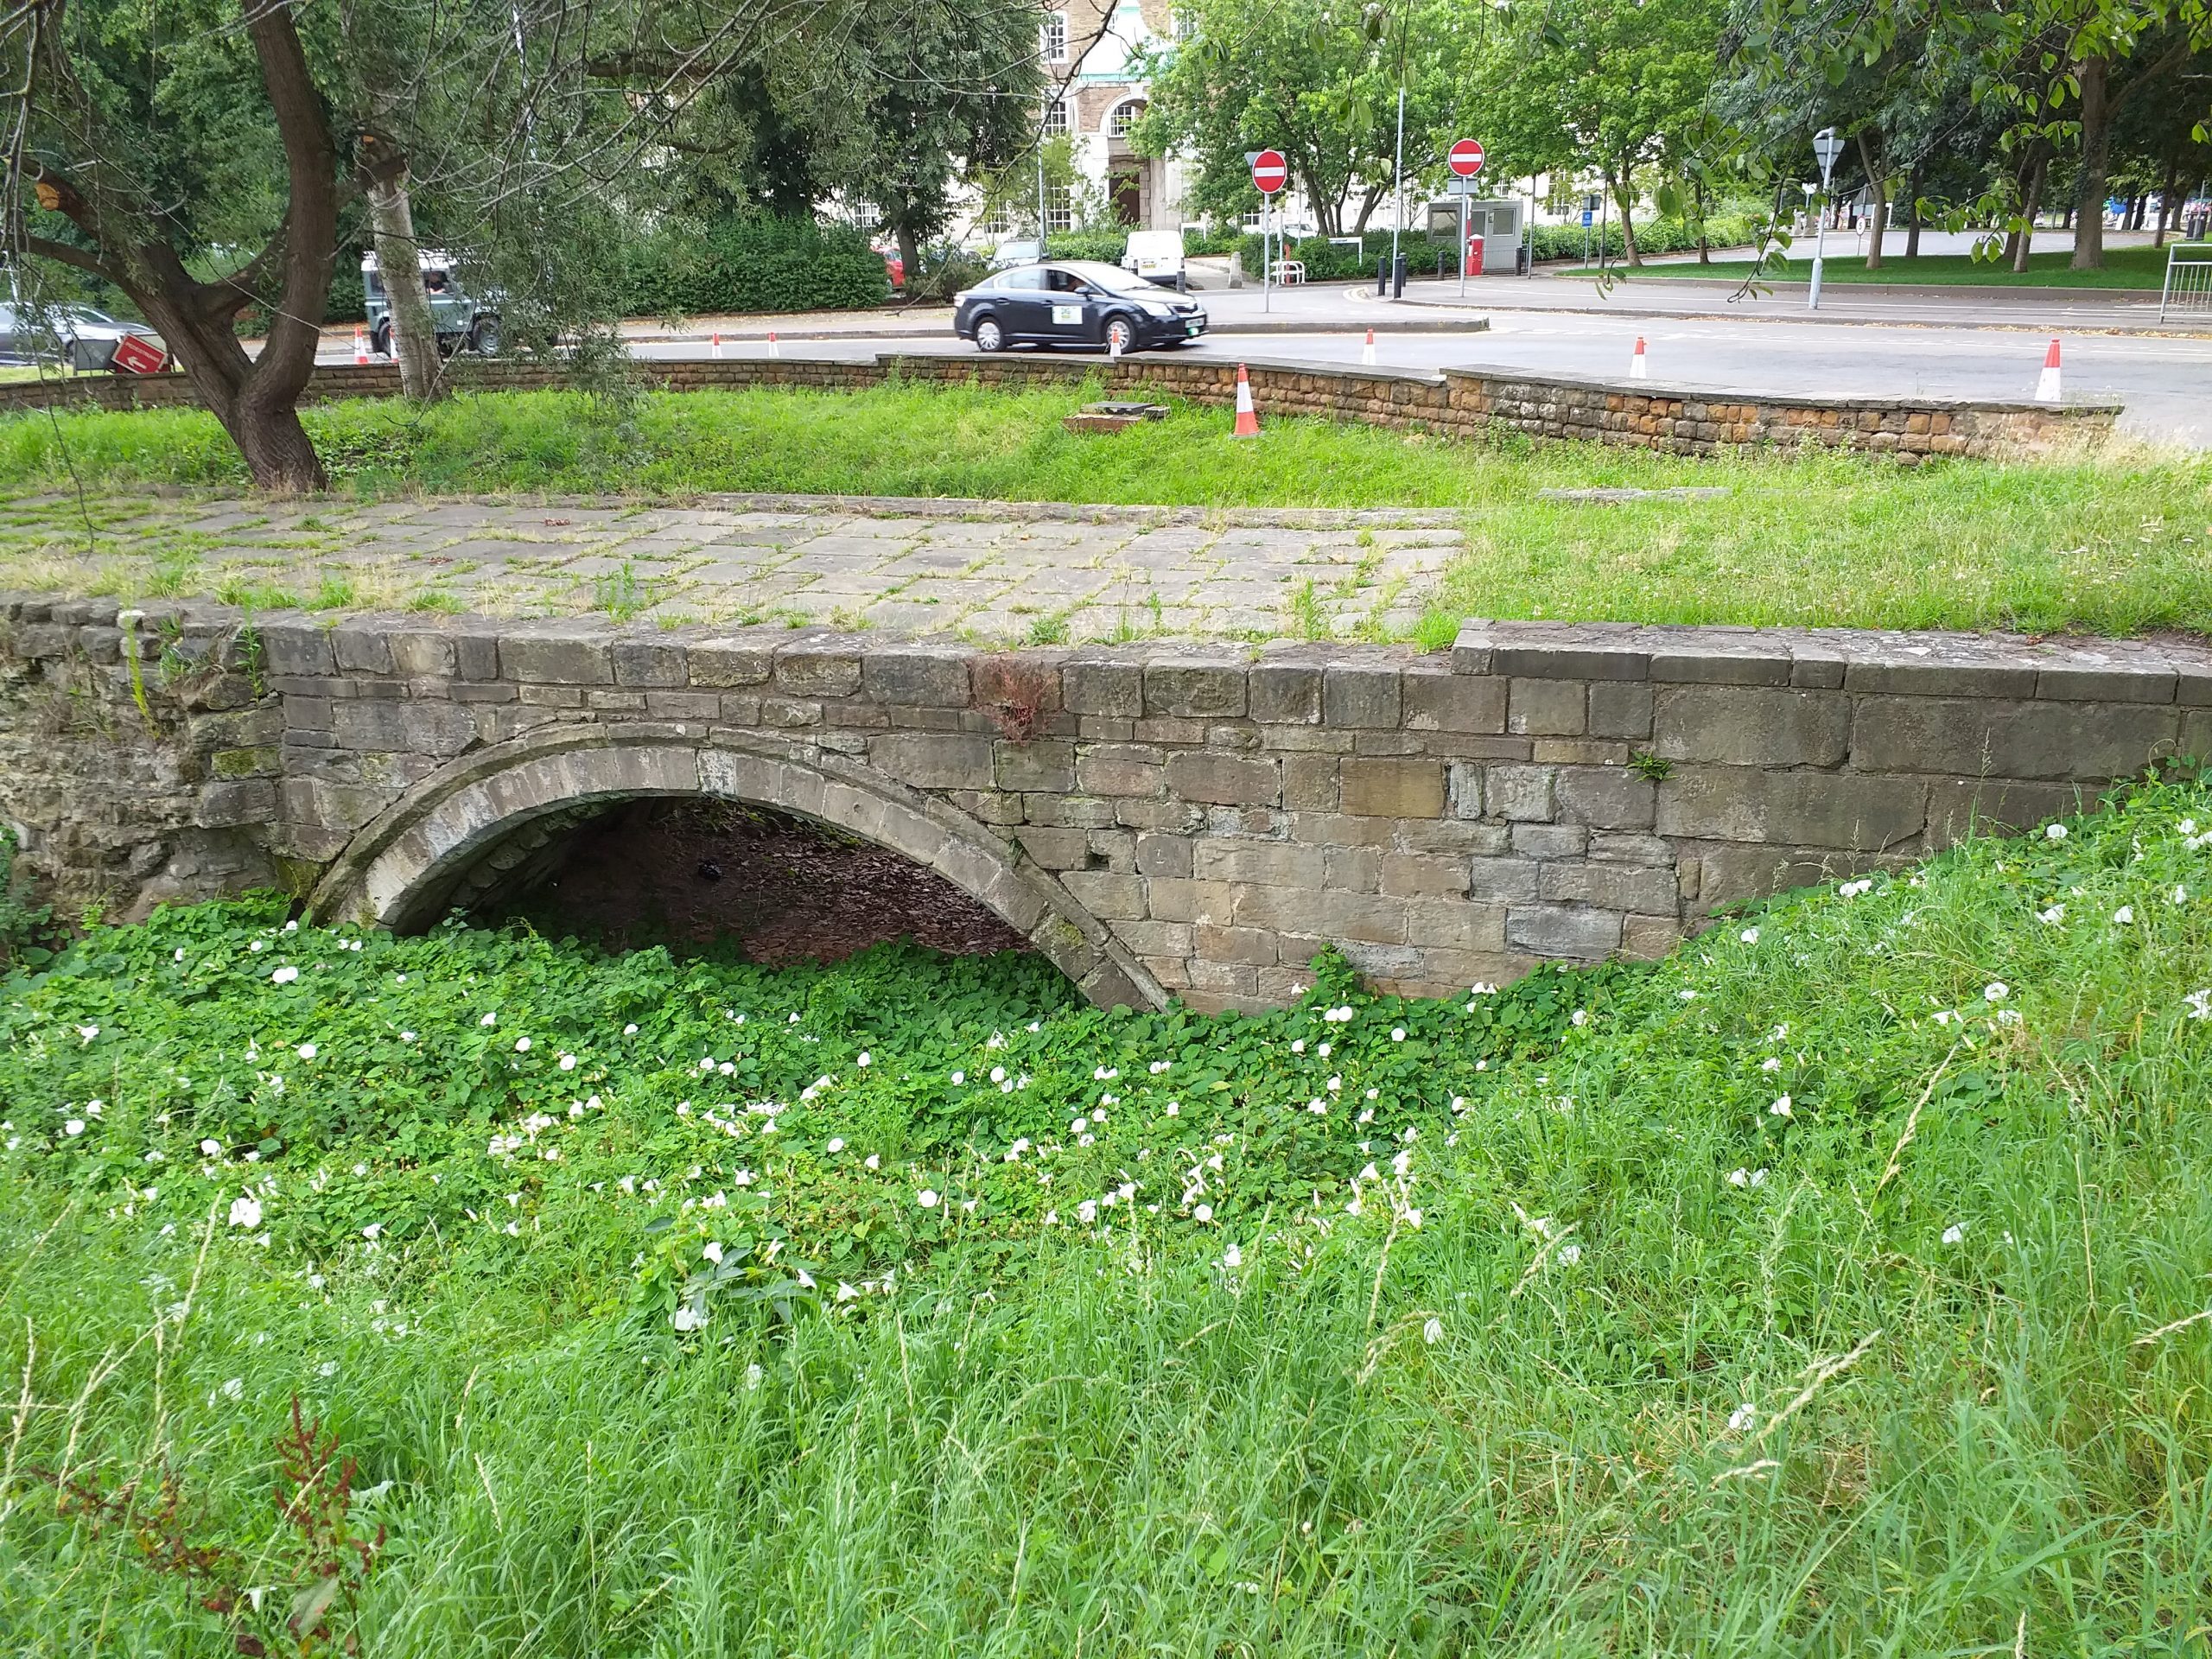 The remains of the medieval Trent Bridge